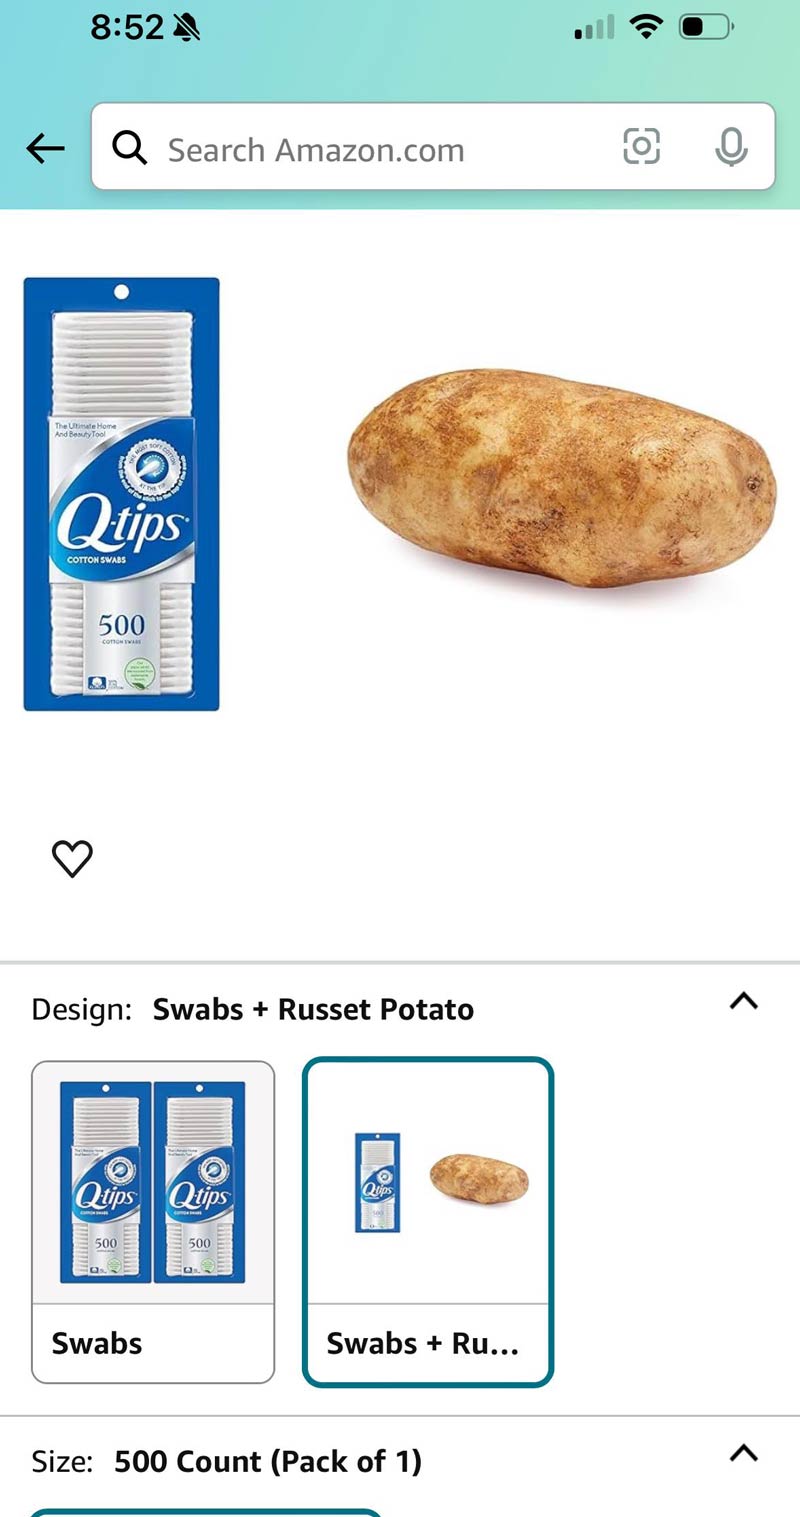 Shopping for Q-Tips when this was suggested as an alternative